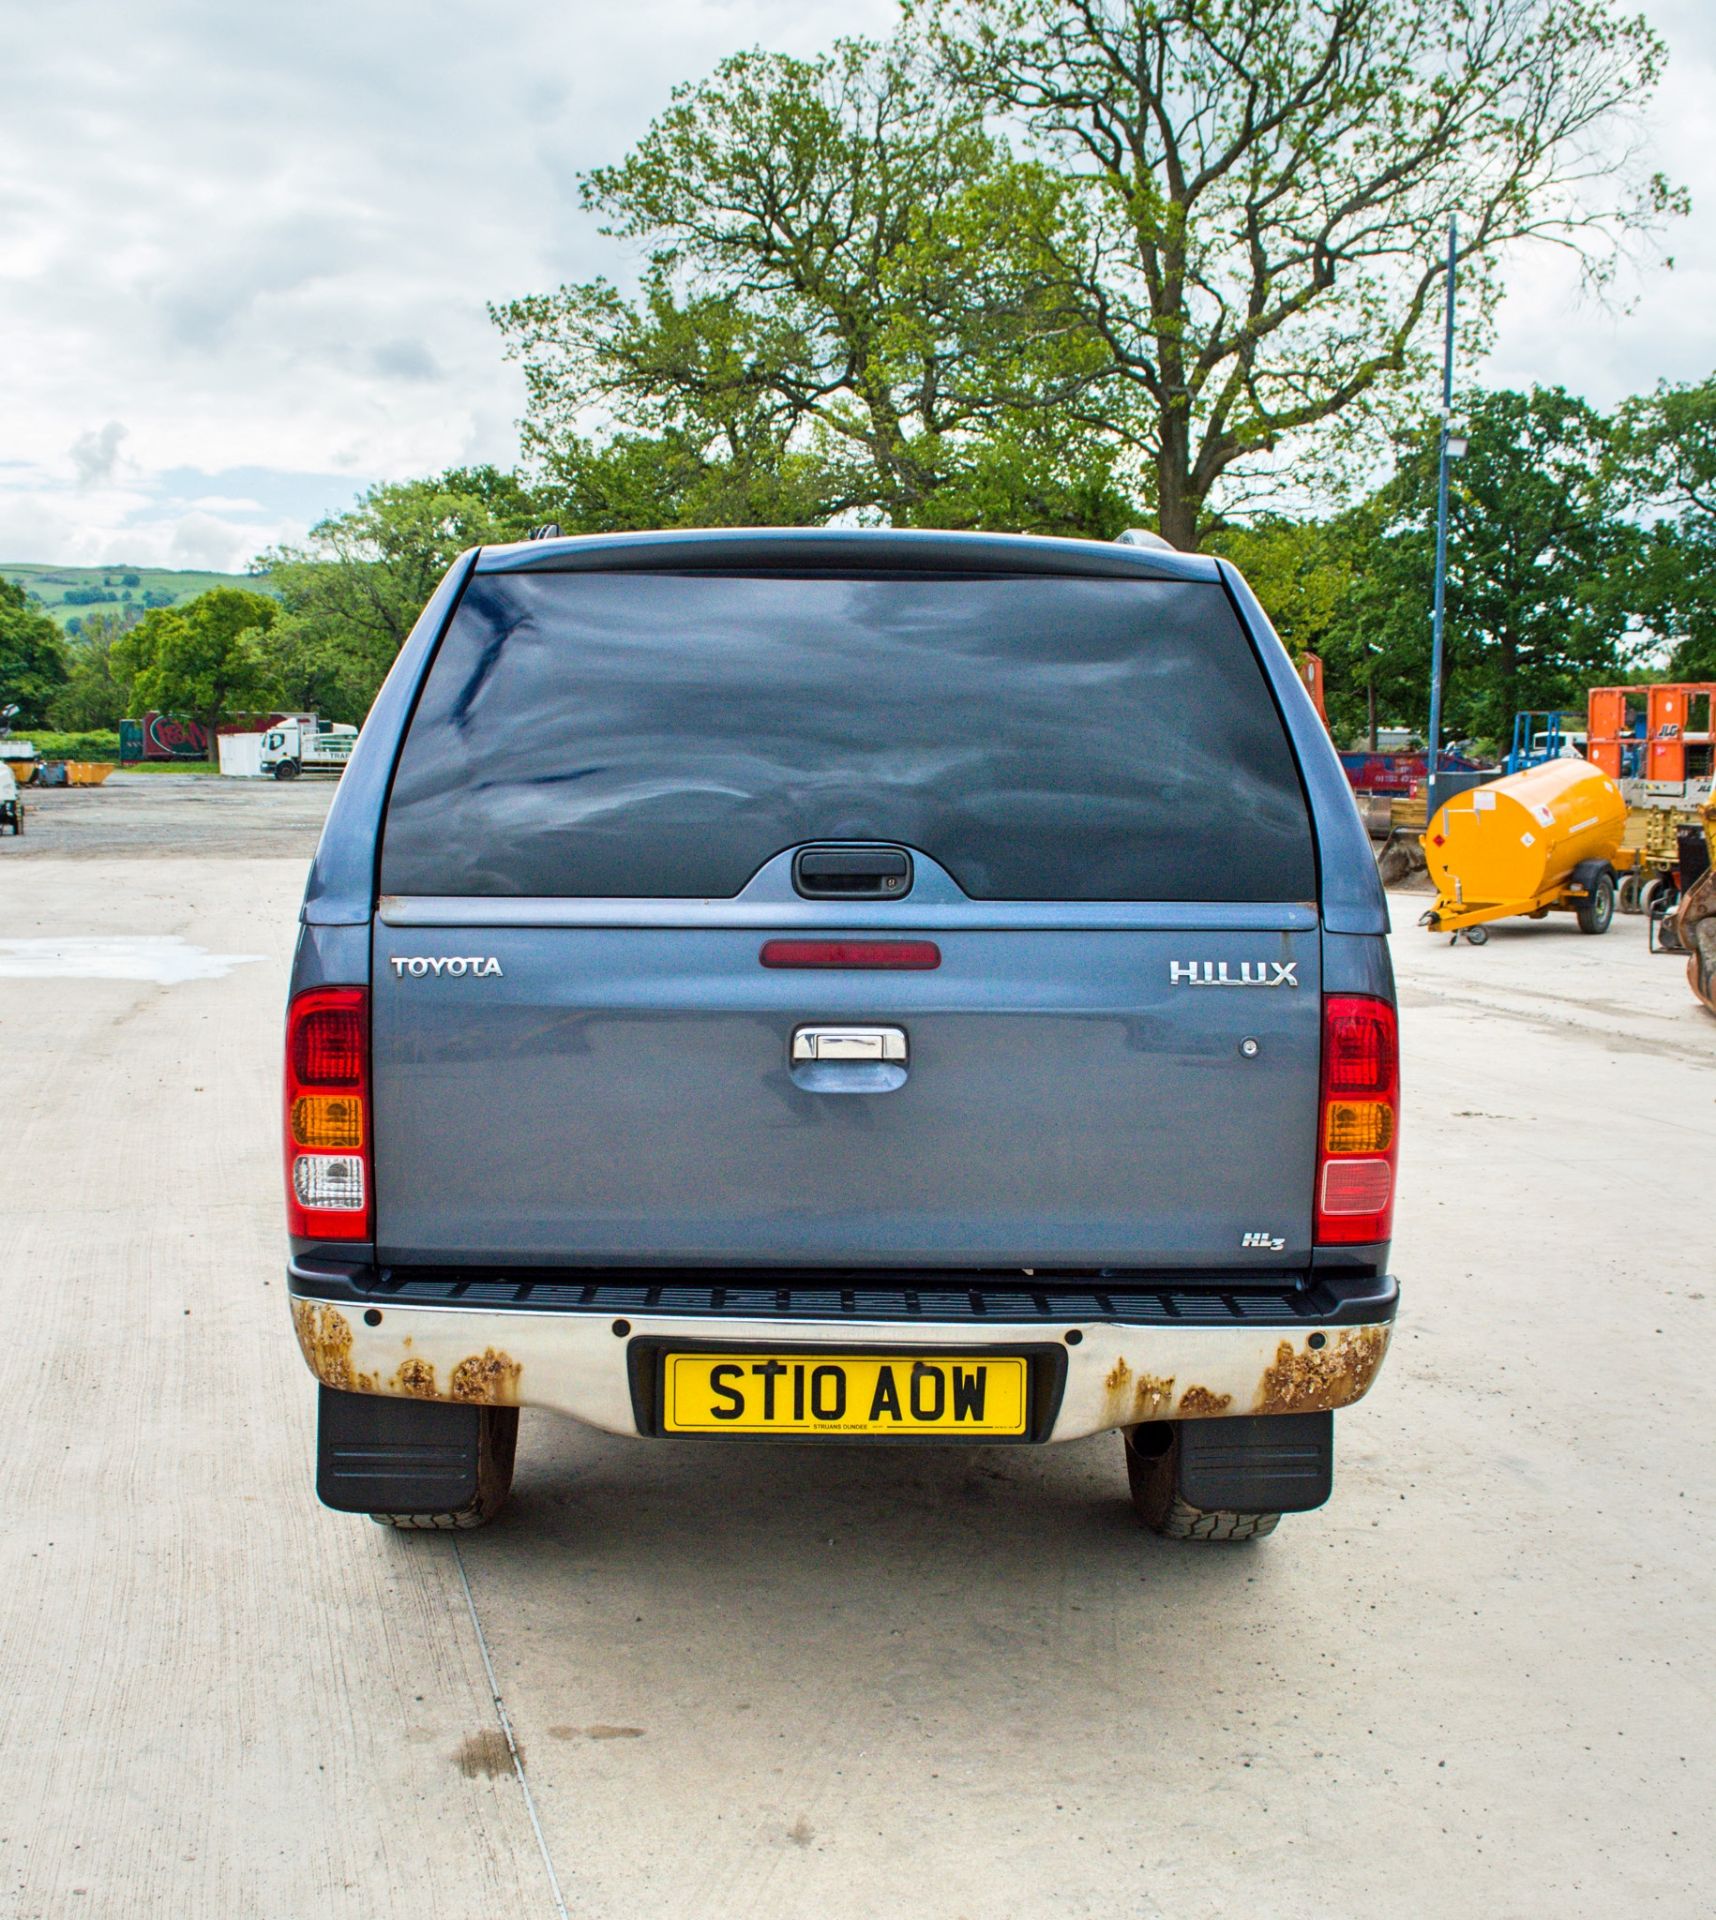 Toyota Hilux 2.5 D-4D 144 HL3 4wd manual double cab pick up Reg No: ST10 AOW Date of Registration: - Image 6 of 25